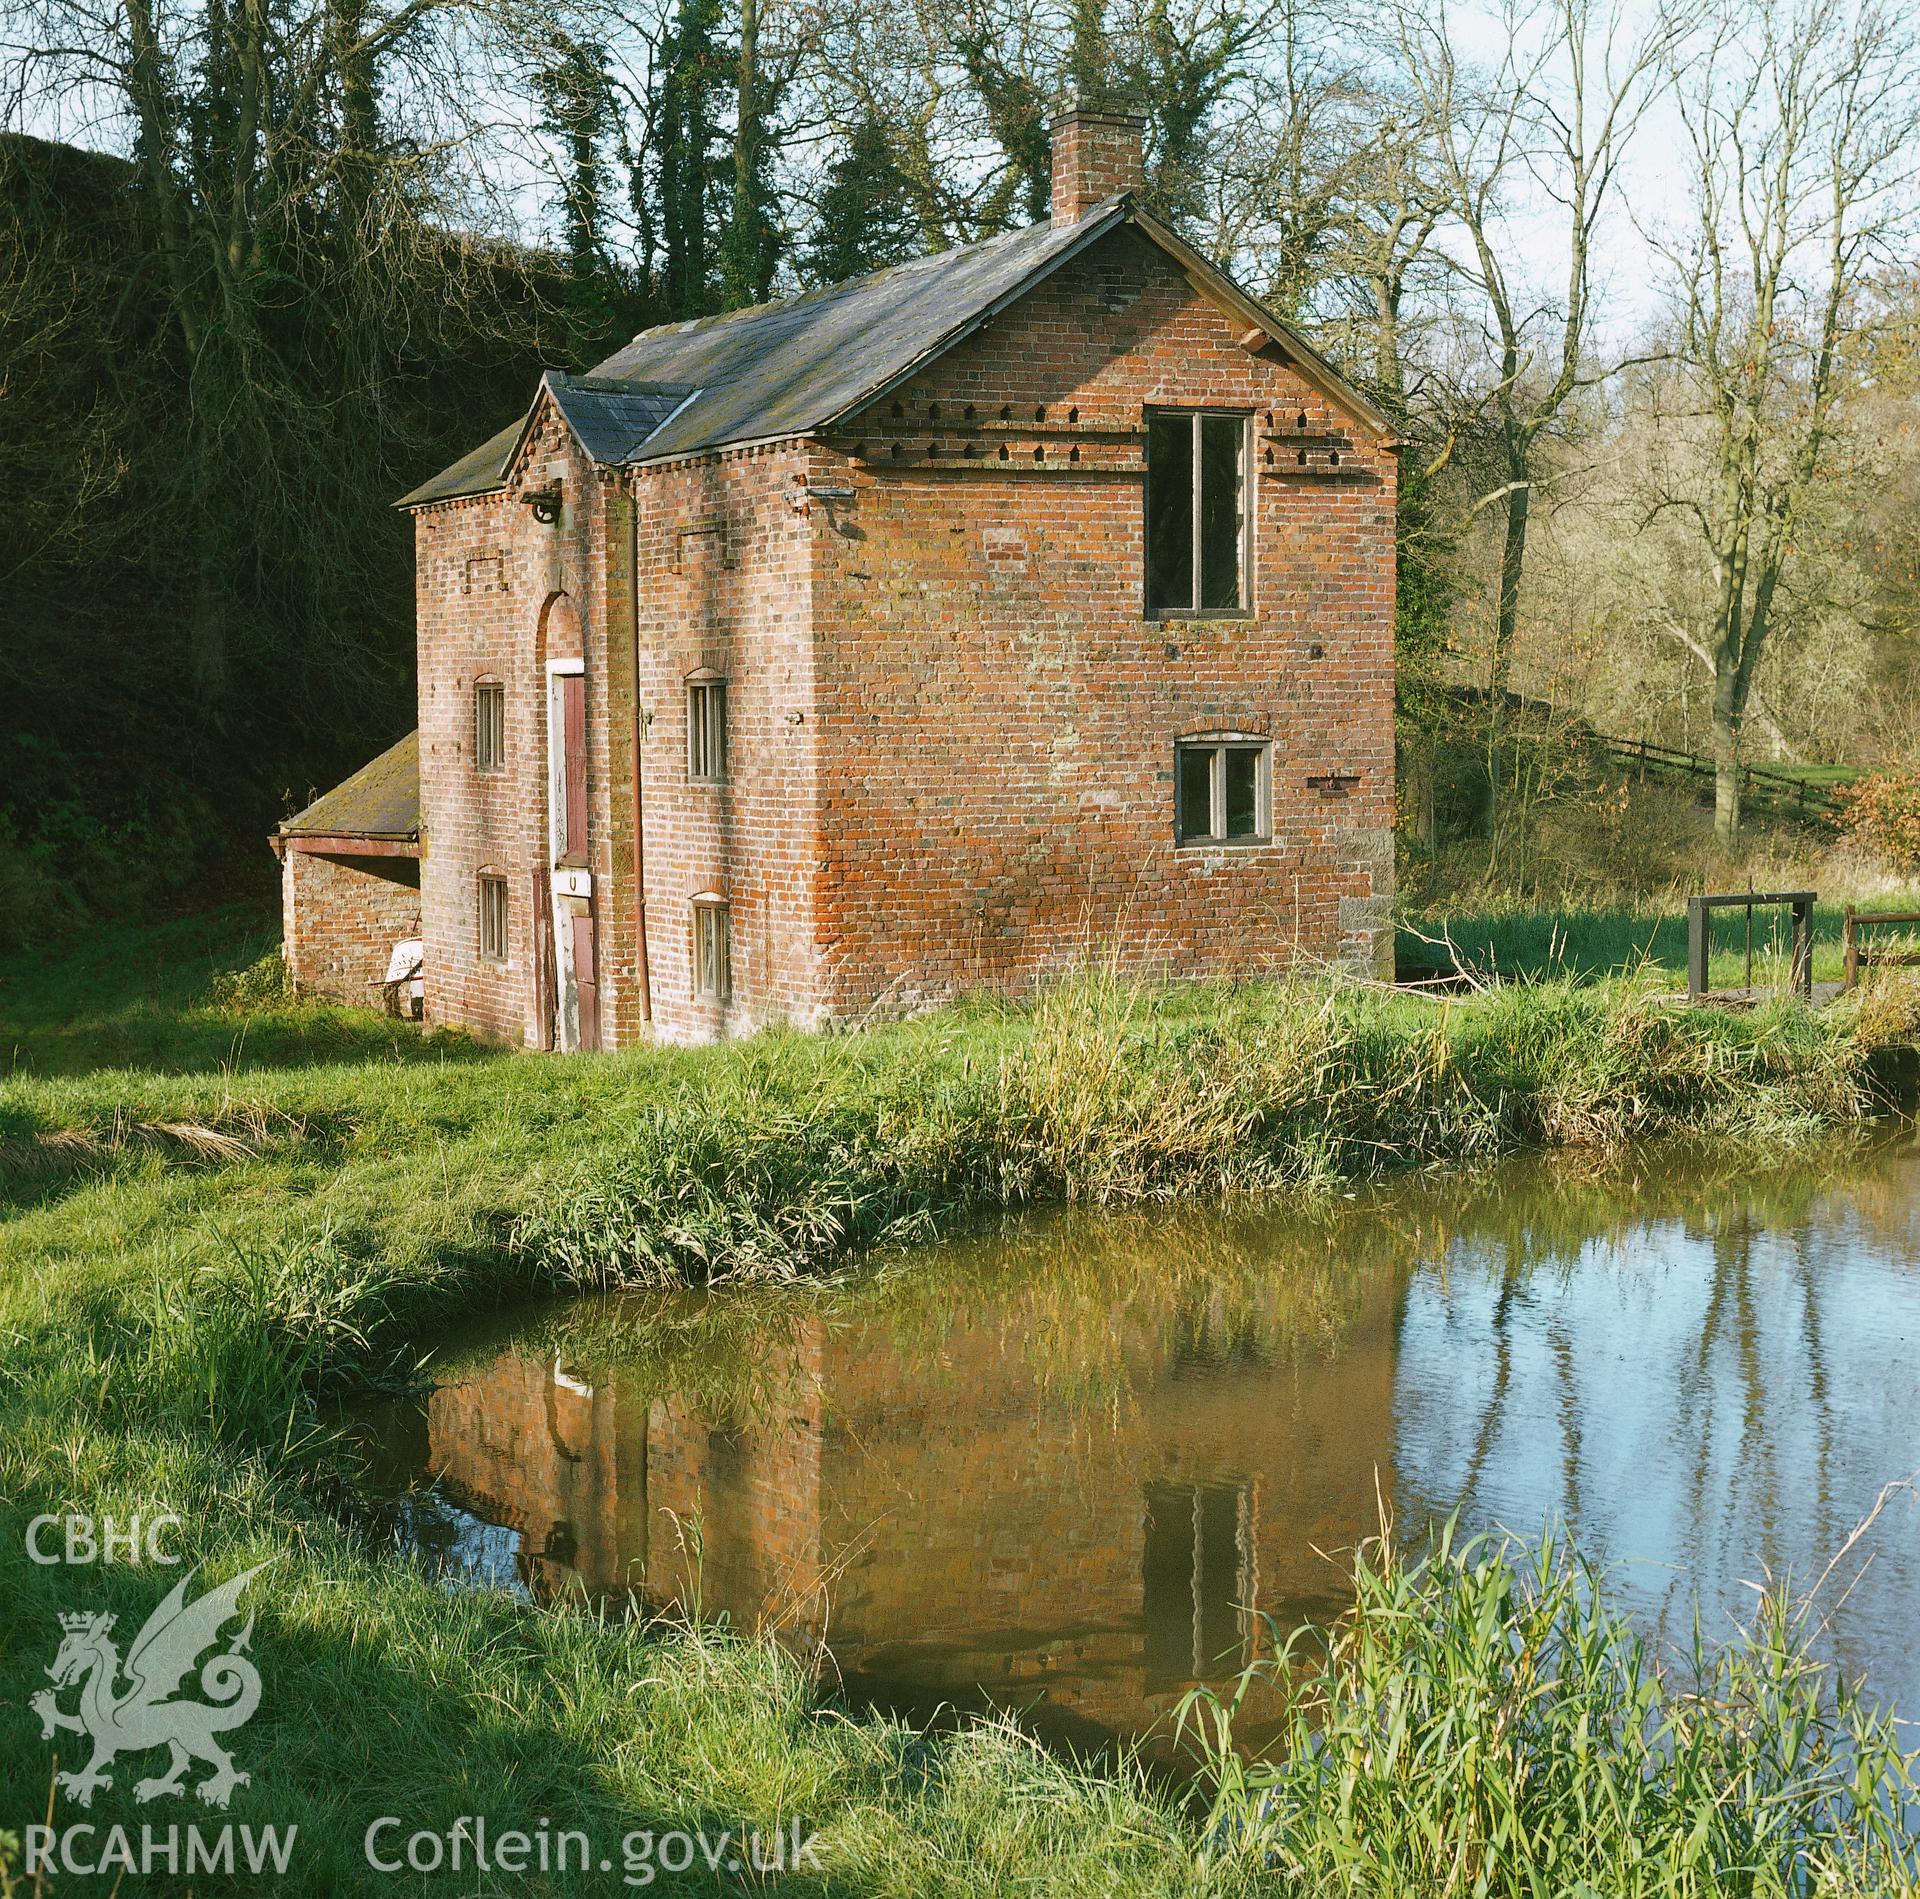 RCAHMW colour transparency showing general view across the millpond of Dymocks Mill, Malpas.